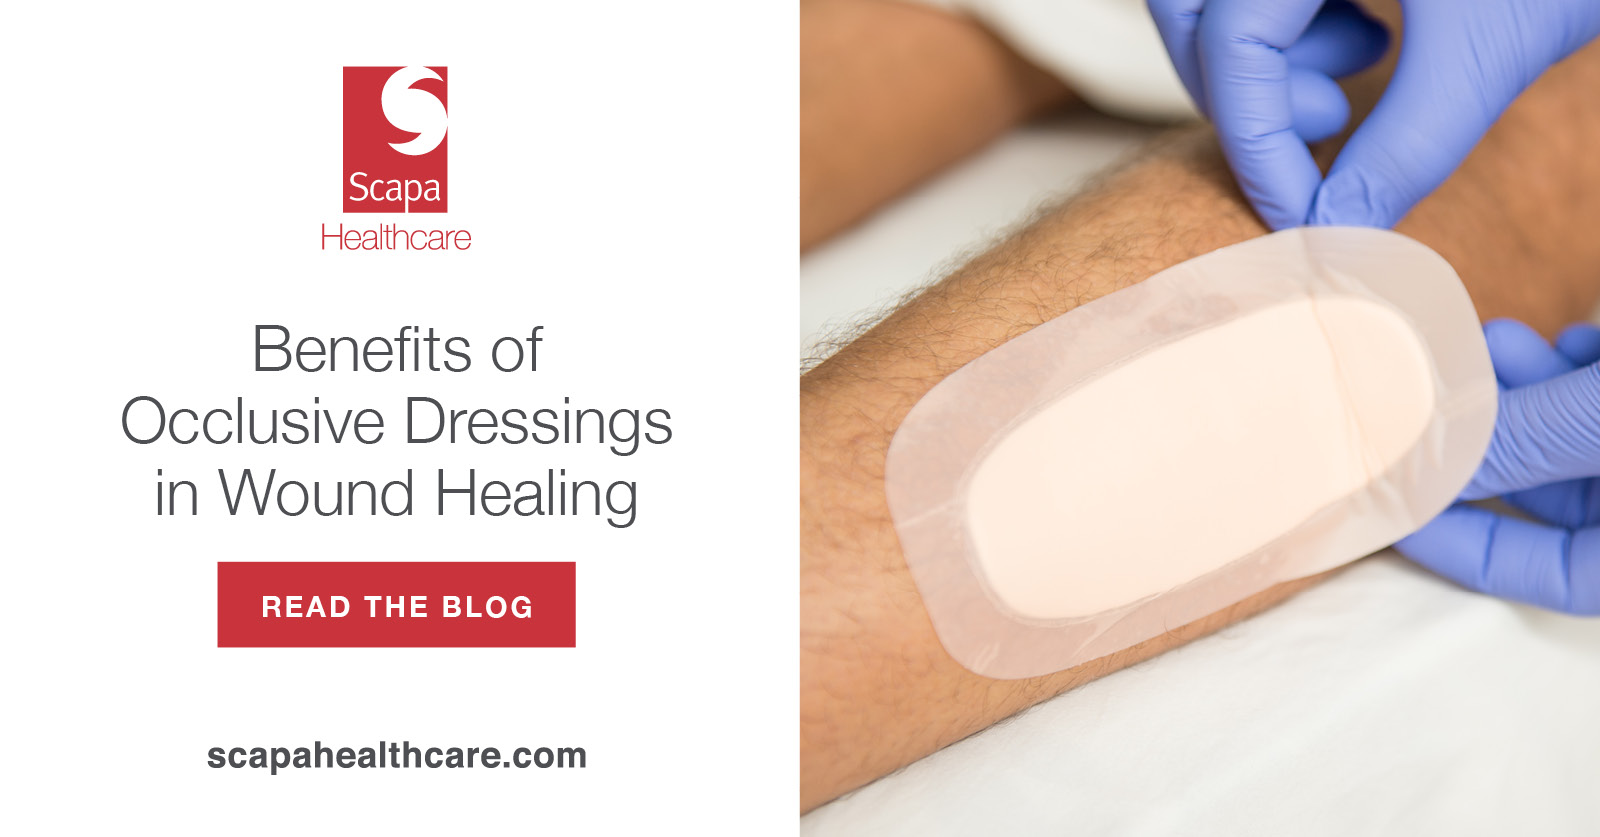 Benefits of Occlusive Dressings in Wound Healing